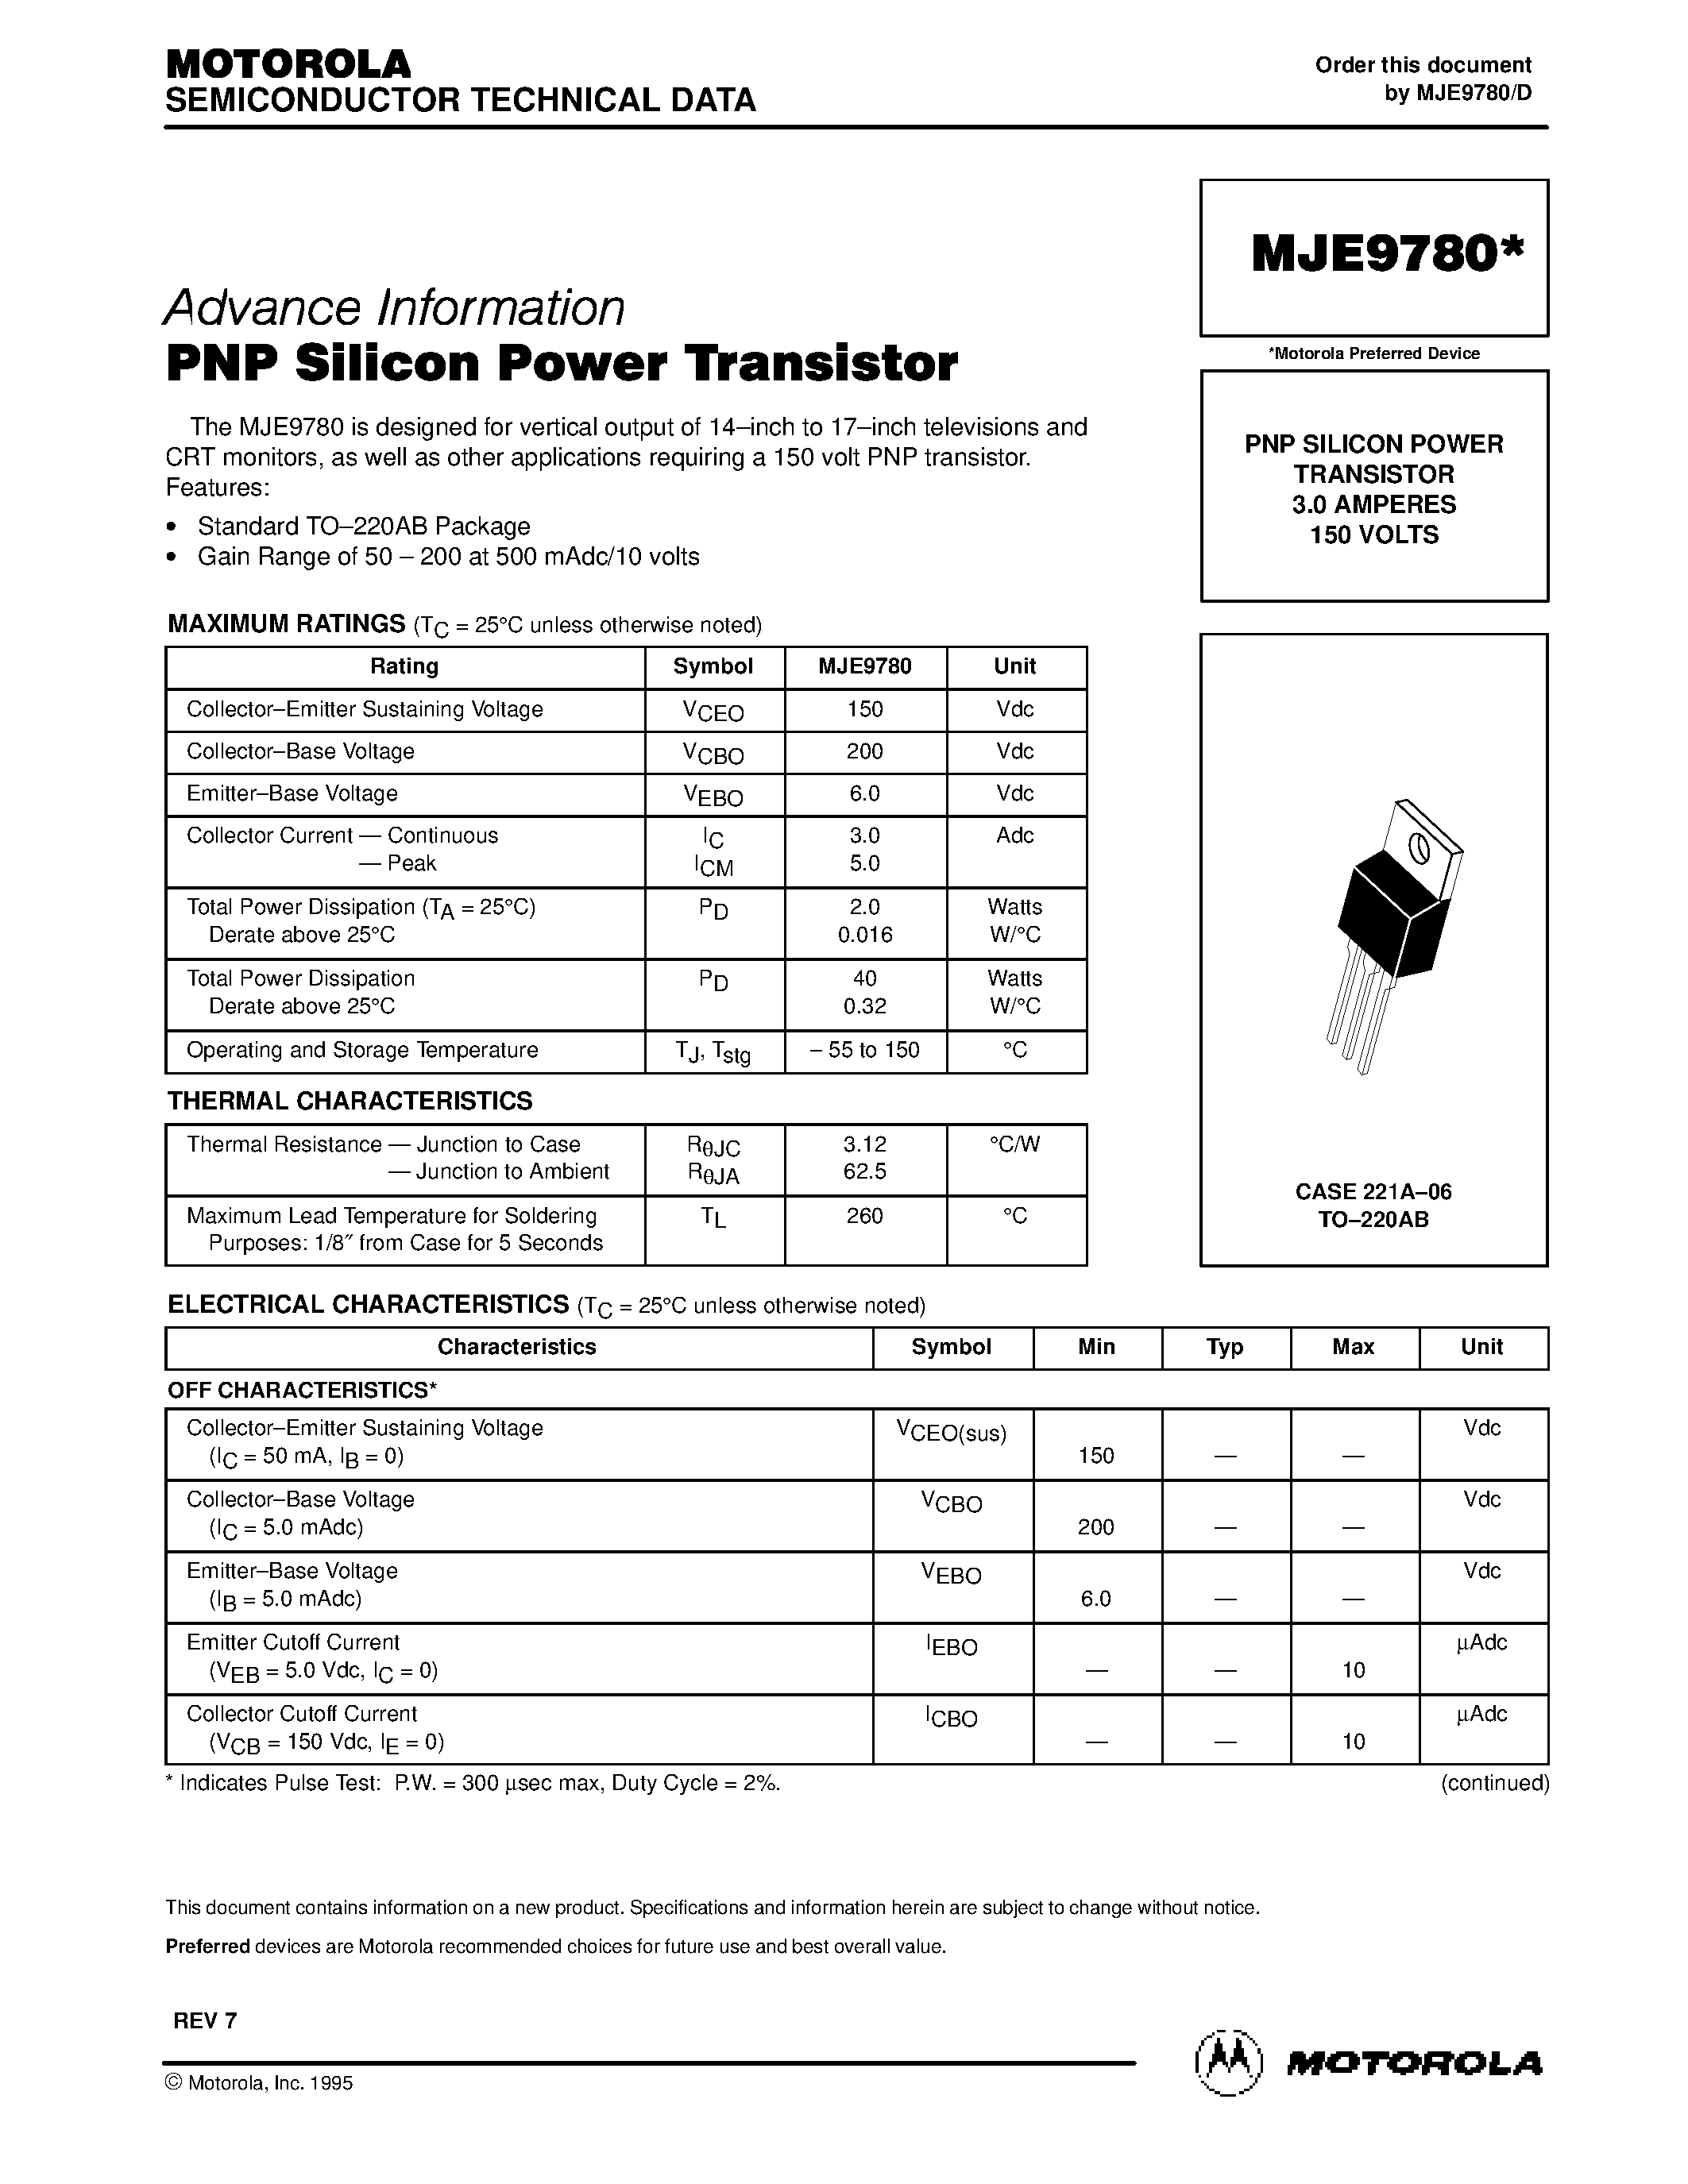 Datasheet MJE9780 - PNP SILICON POWER TRANSISTOR 3.0 AMPERES 150 VOLTS page 1